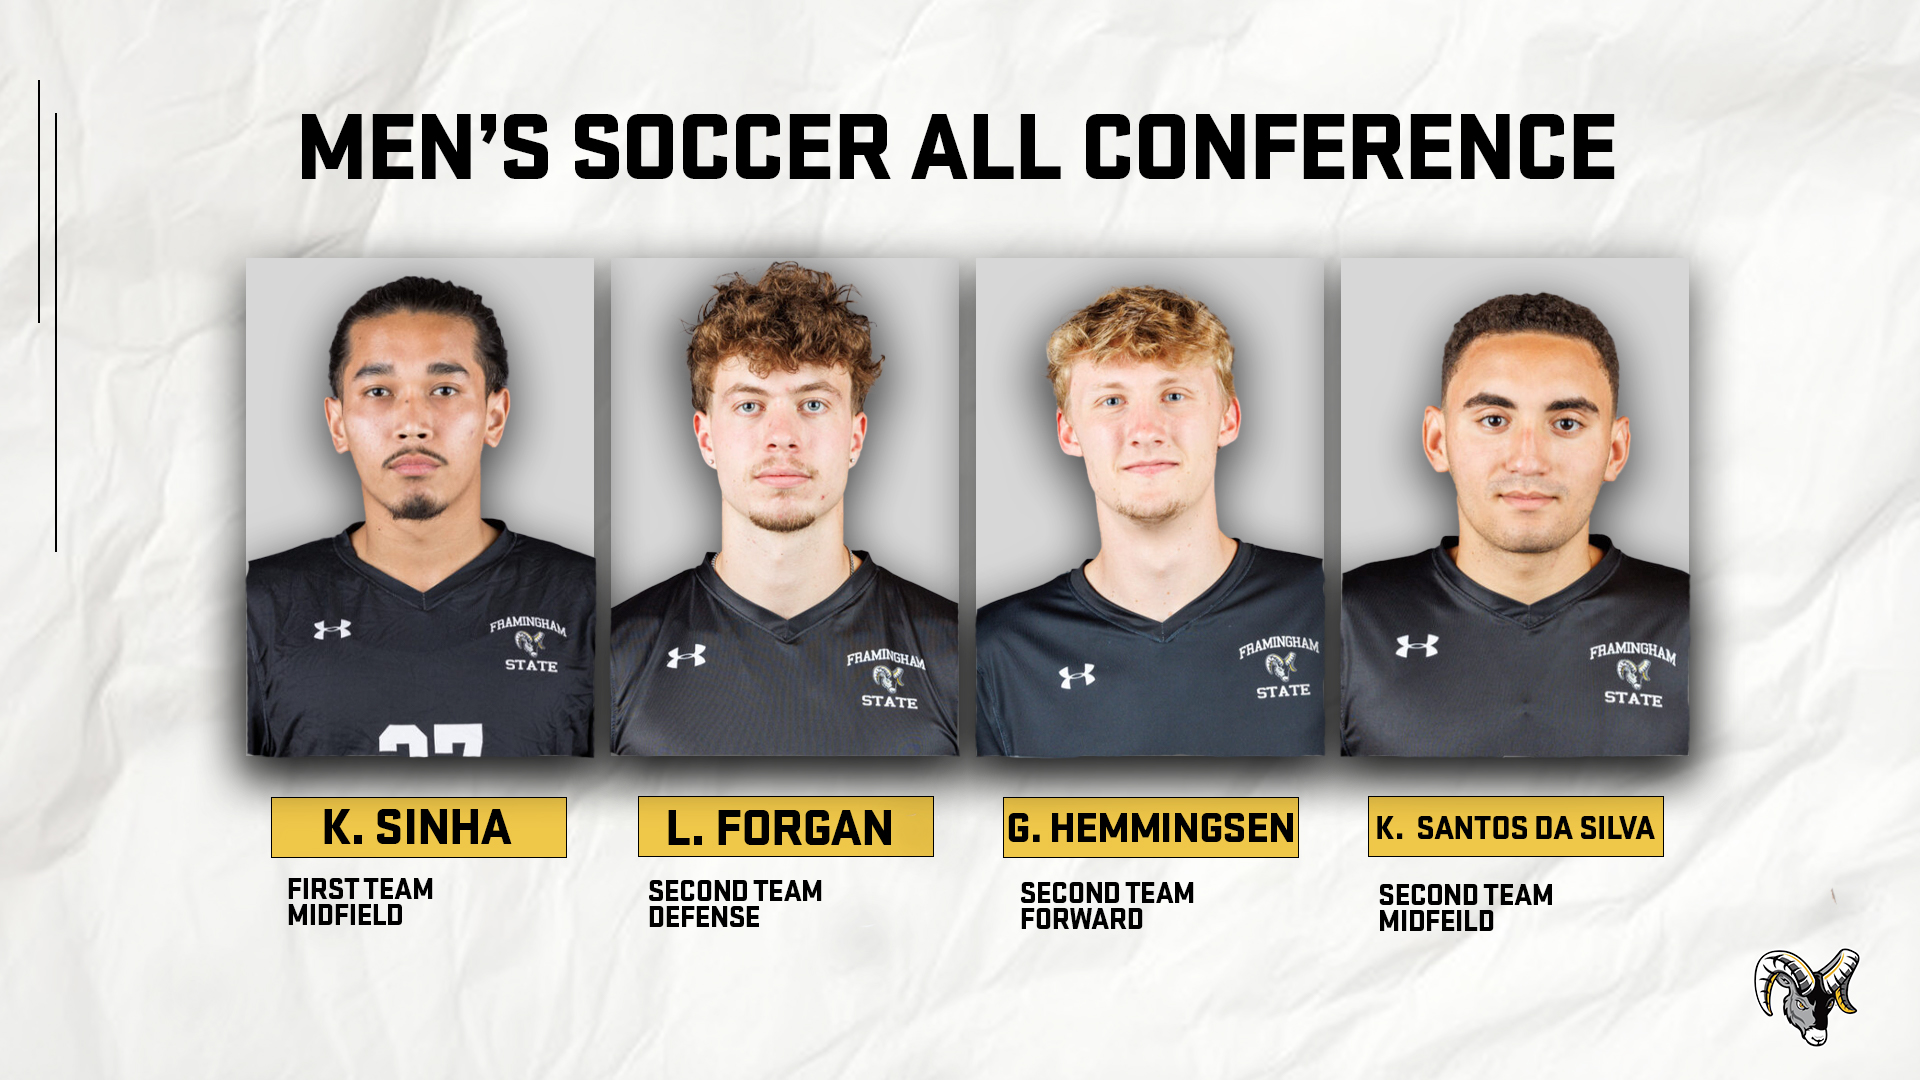 Sinha Named MASCAC Offensive Player of the Year; Four Named All-Conference